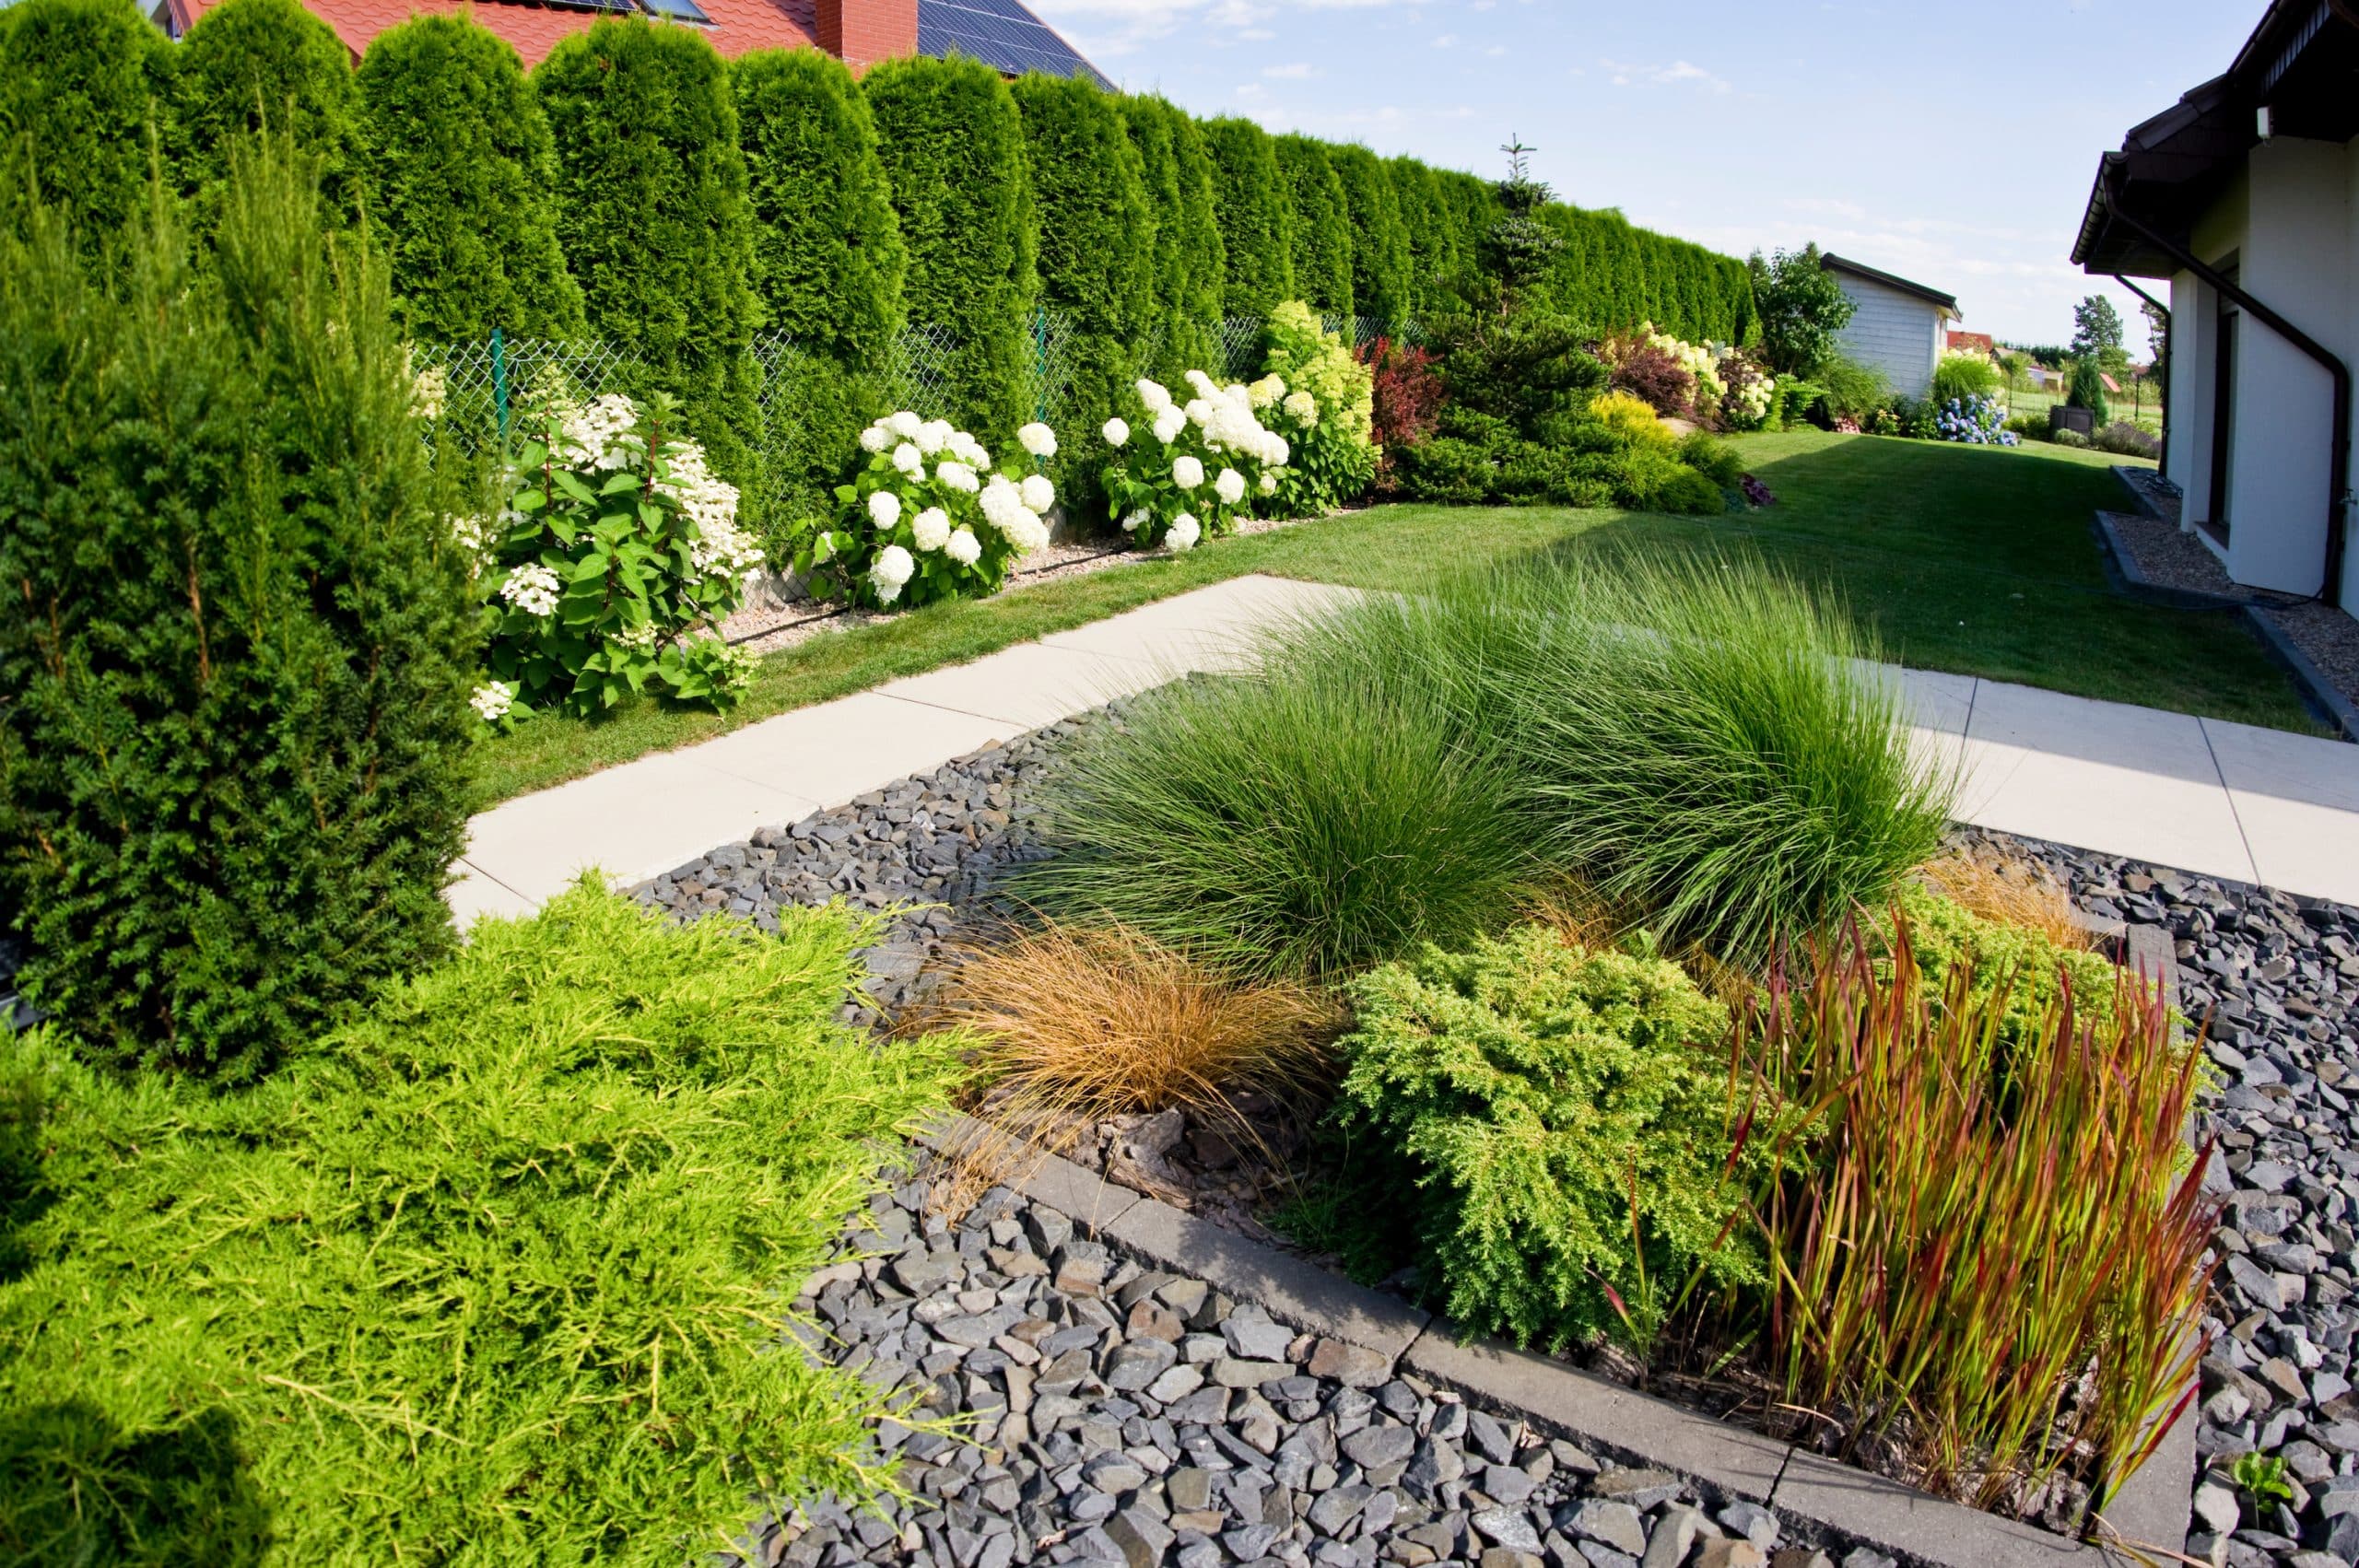 The frontyard of a modern house, garden details with colorful plants, dry grass beds surrounded by grey rocks.